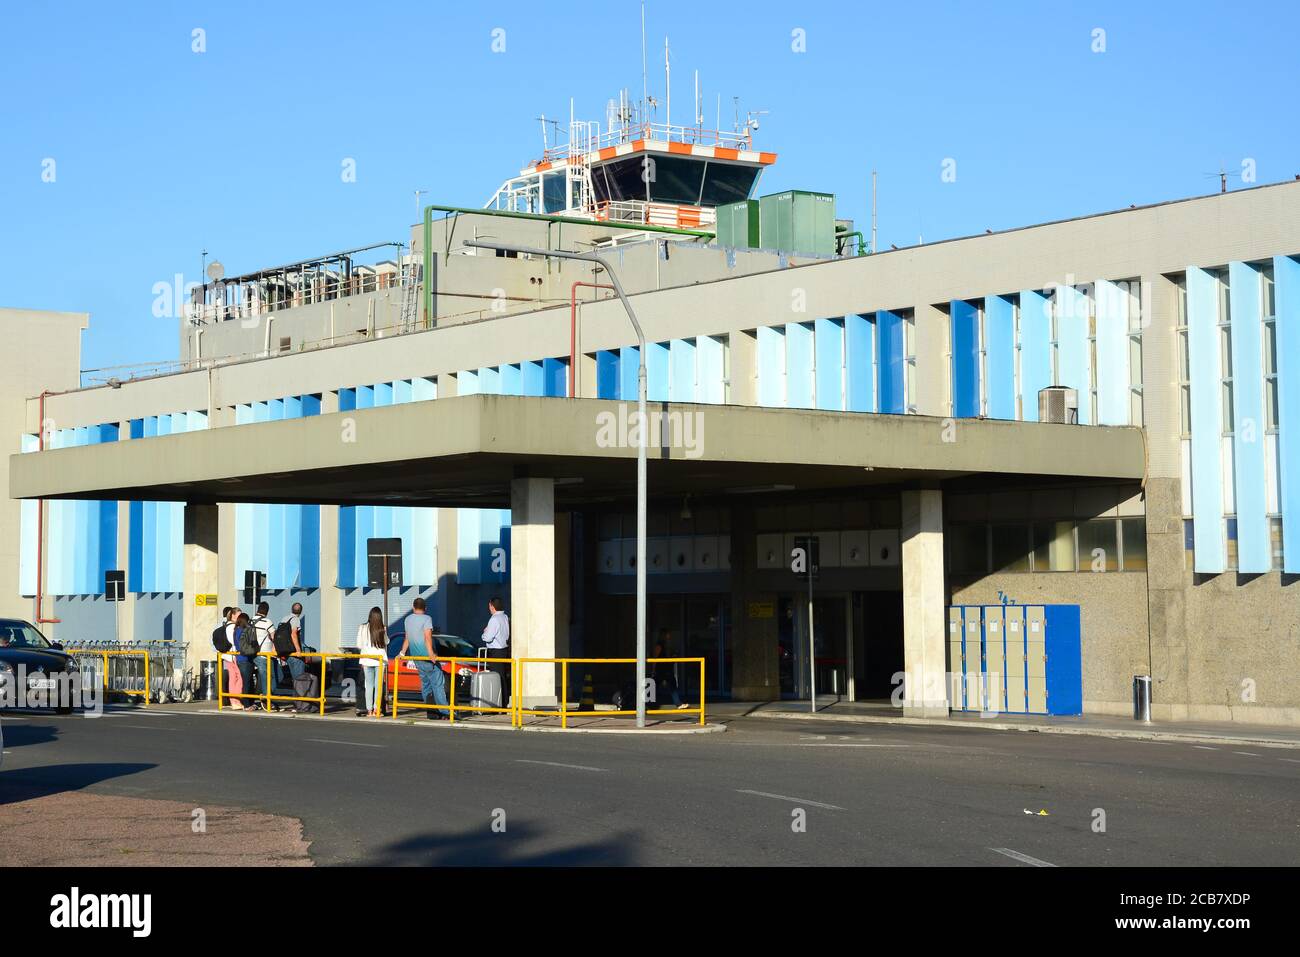 Terminal 2 of Porto Alegre Airport, Brazil. Former Sao Joao Federal Airport. In 2019 the building became the administration center for FRAPORT Brazil. Stock Photo